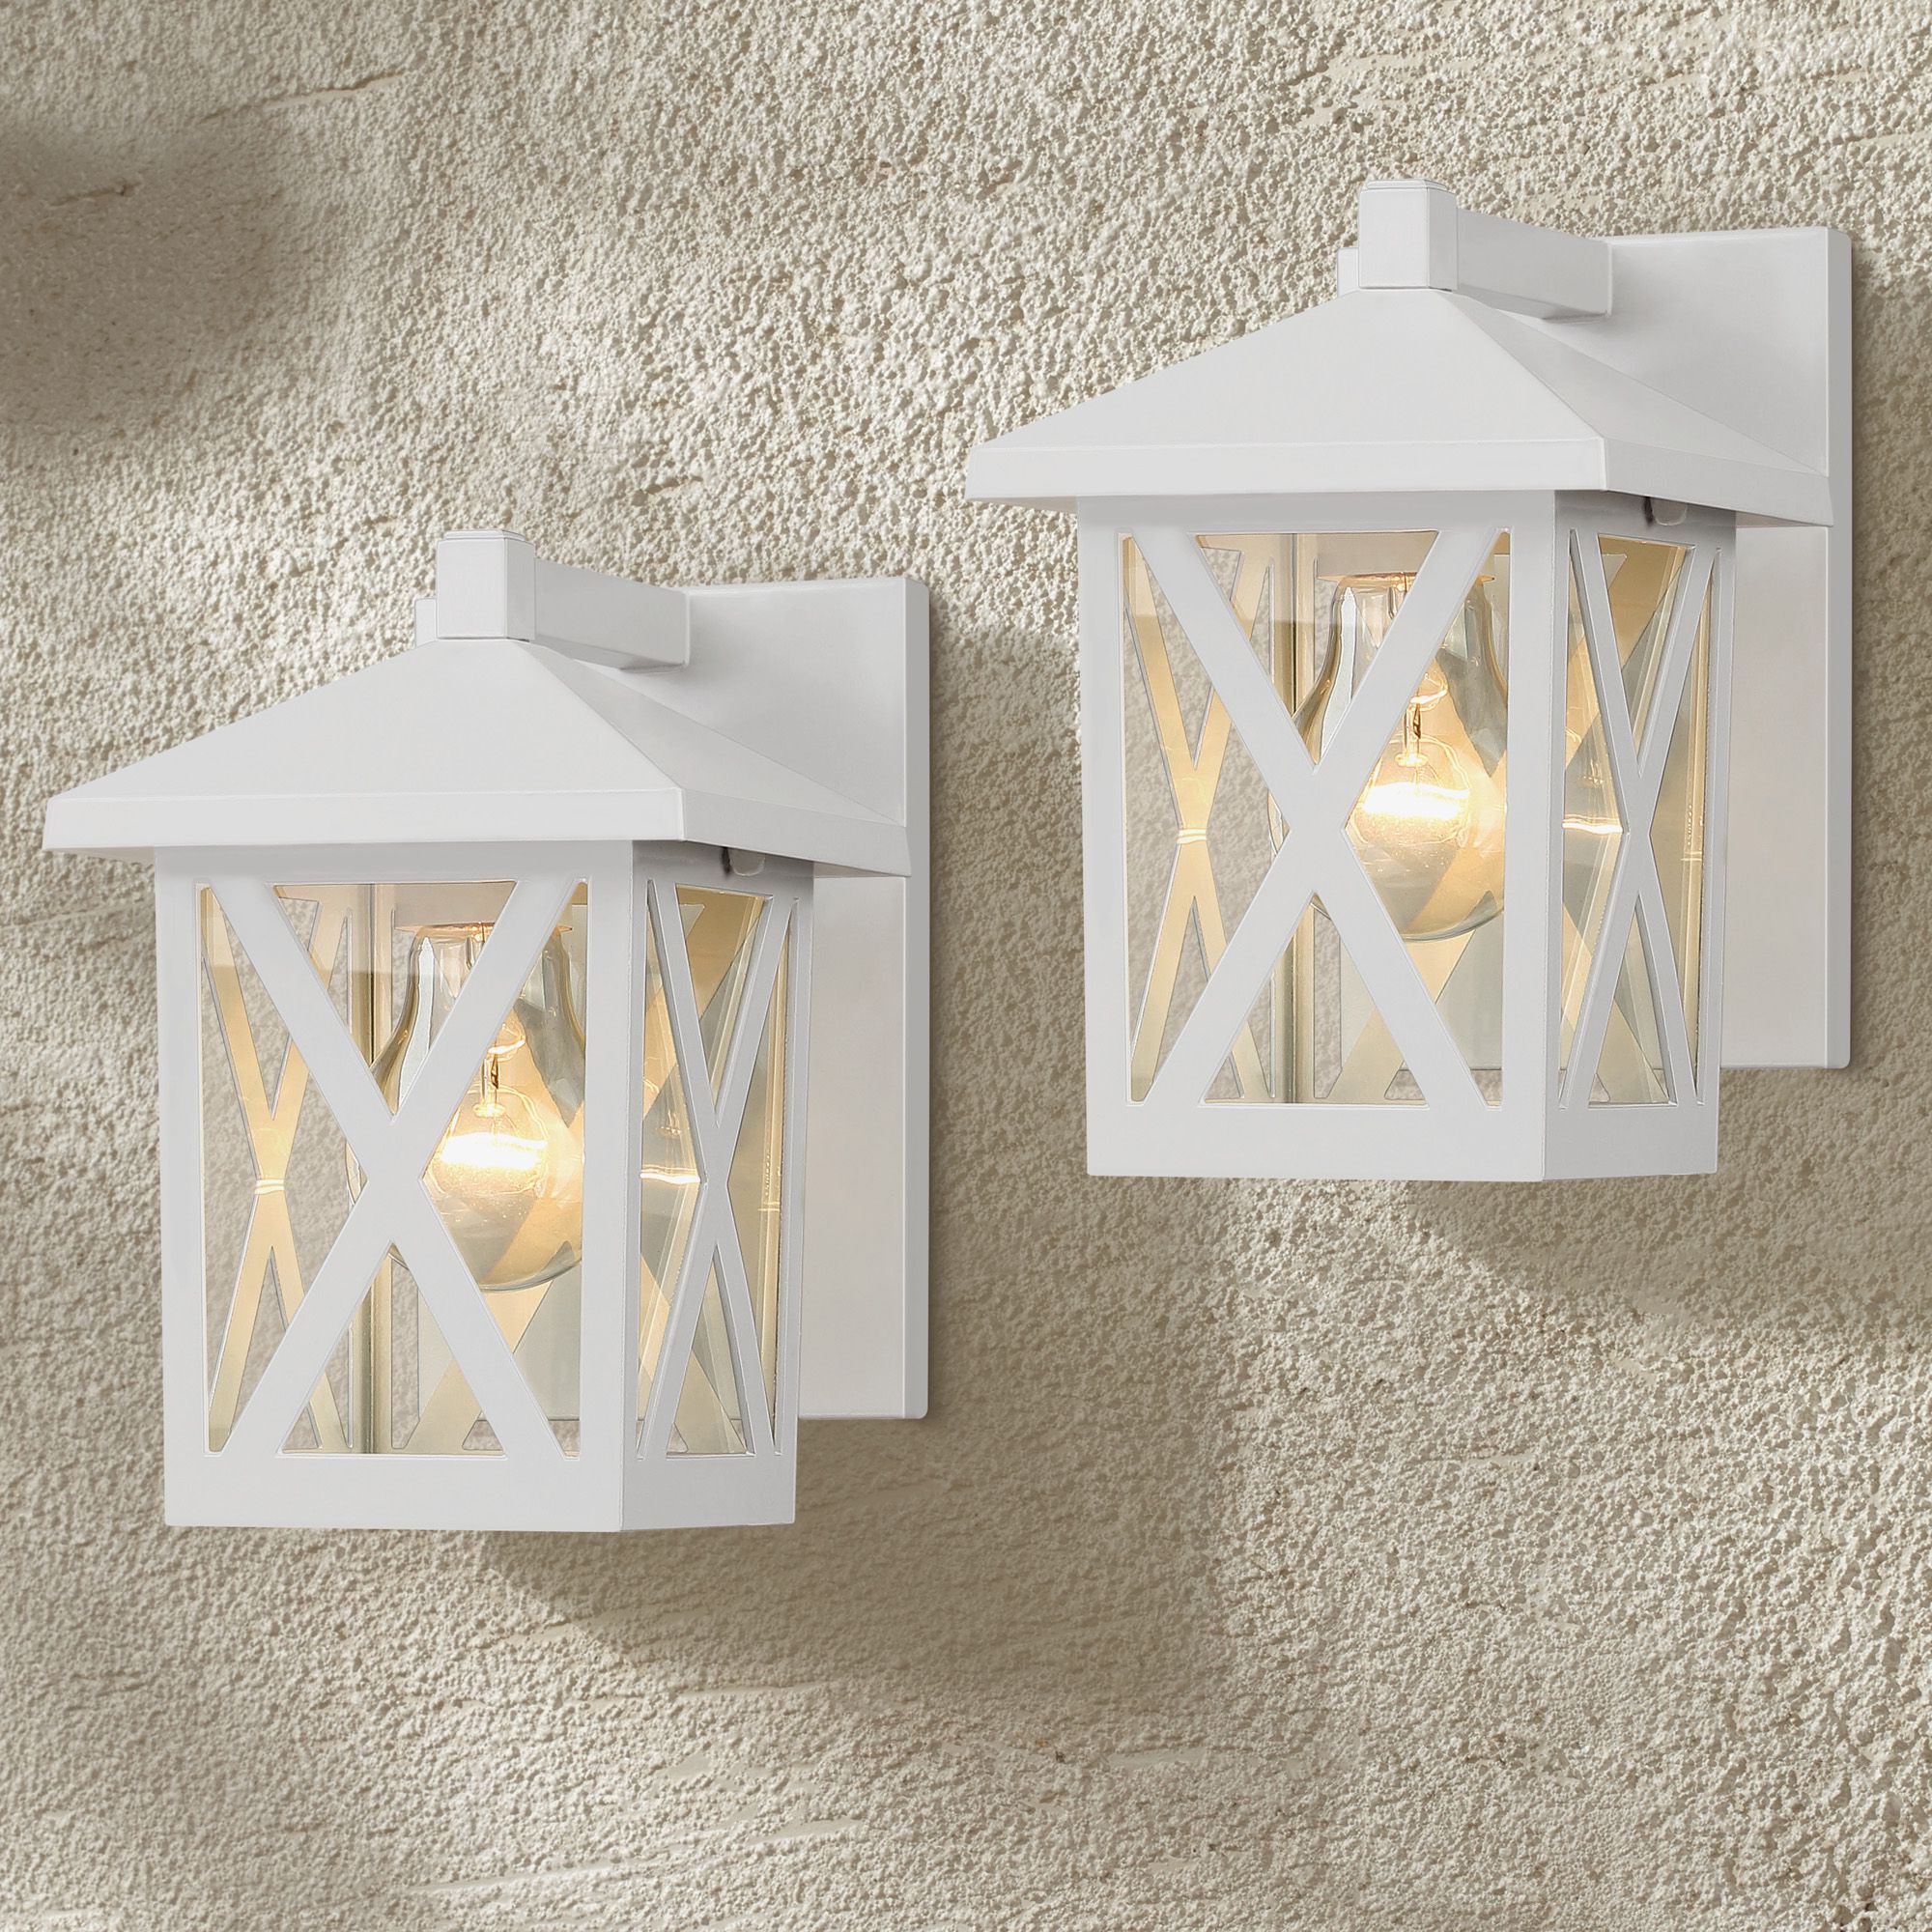 Famous Cottage White Lantern Chandeliers Pertaining To John Timberland Country Cottage Outdoor Wall Light Fixtures Set Of 2 White  7 1/2" Lantern Clear Glass Exterior House Porch Patio – Walmart (View 11 of 15)